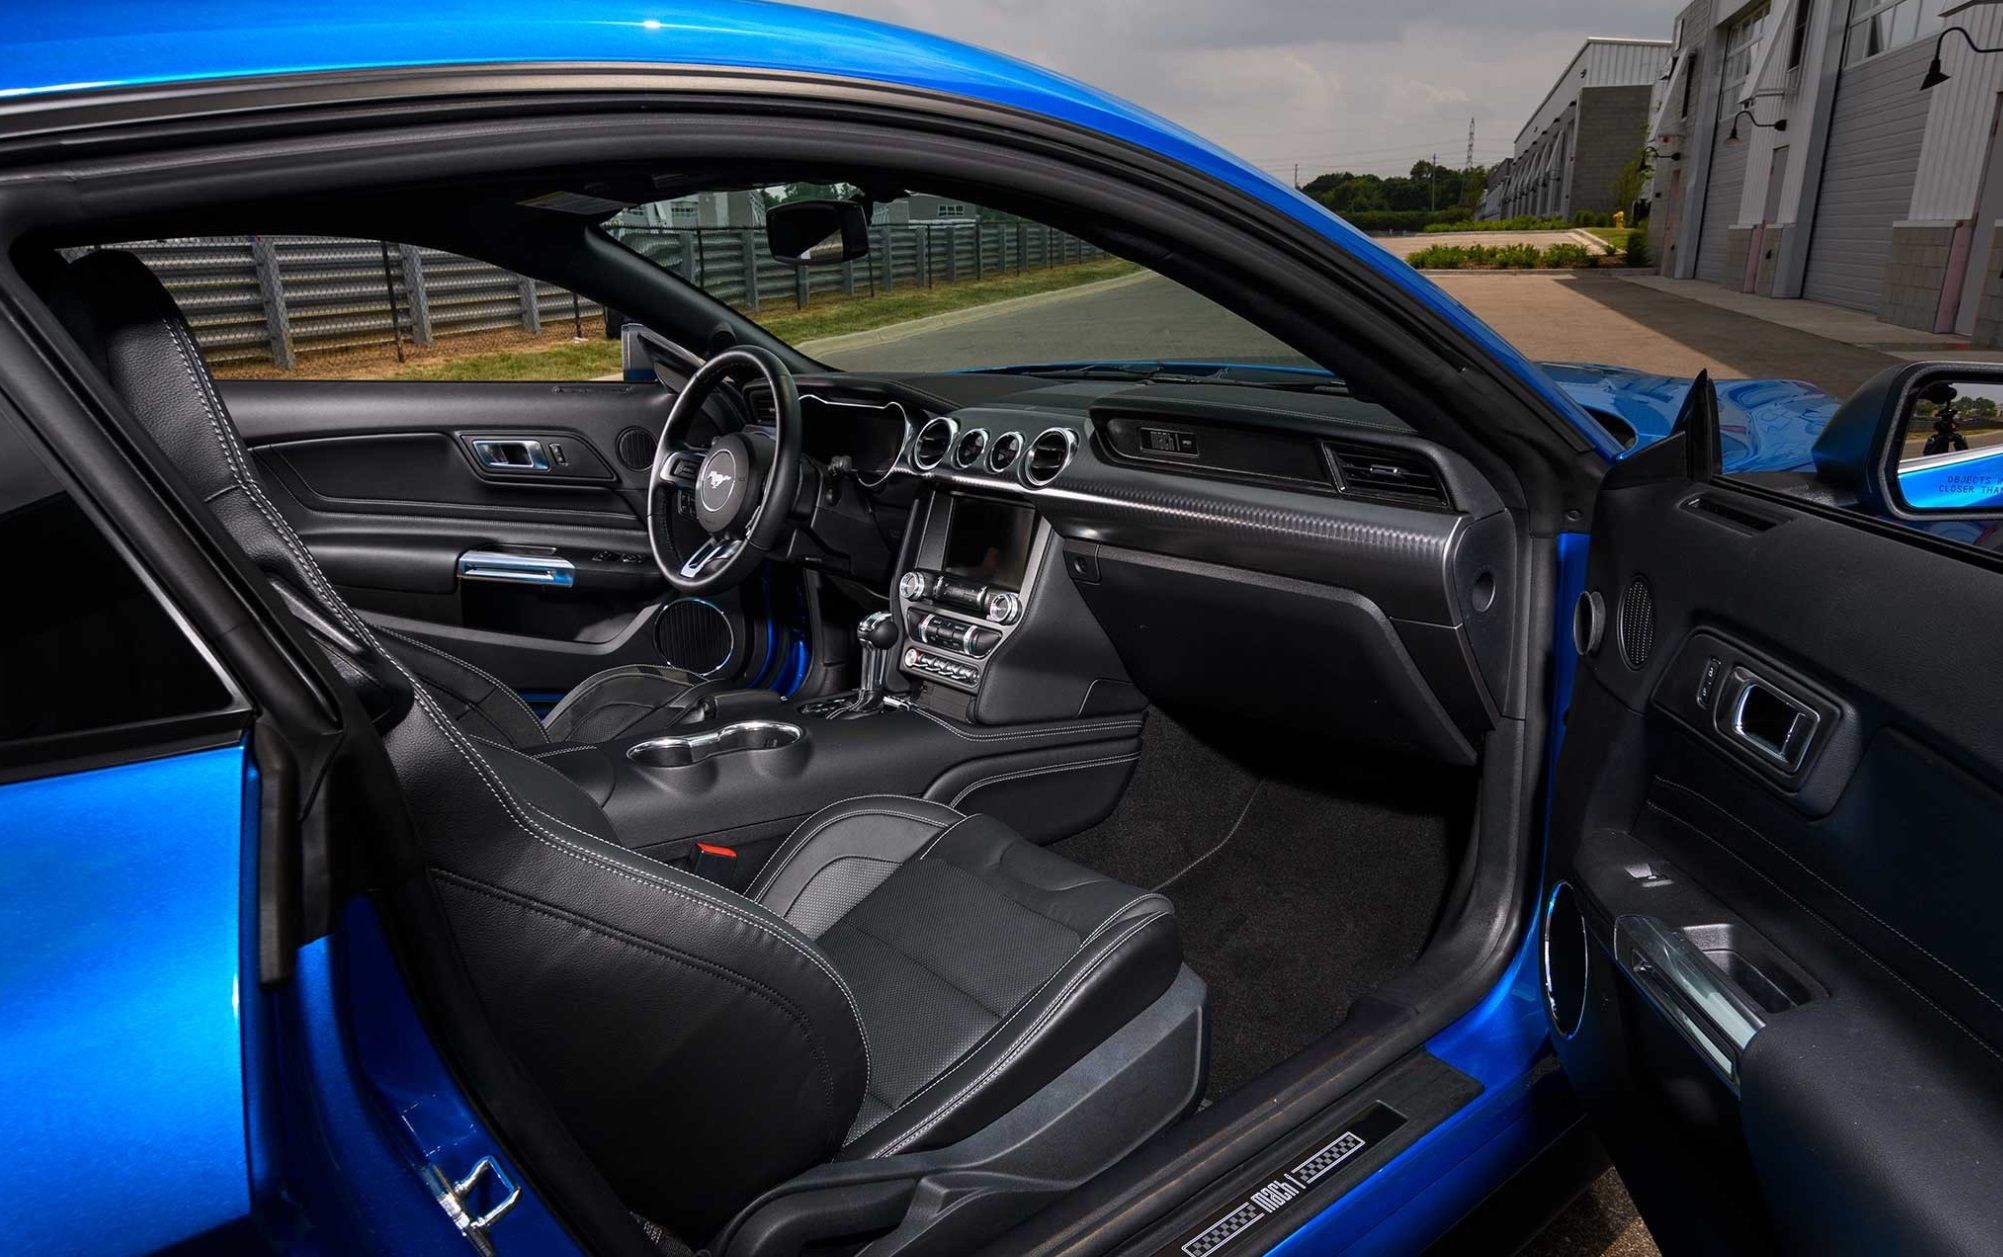 The 2021 Ford Mustang Interior.